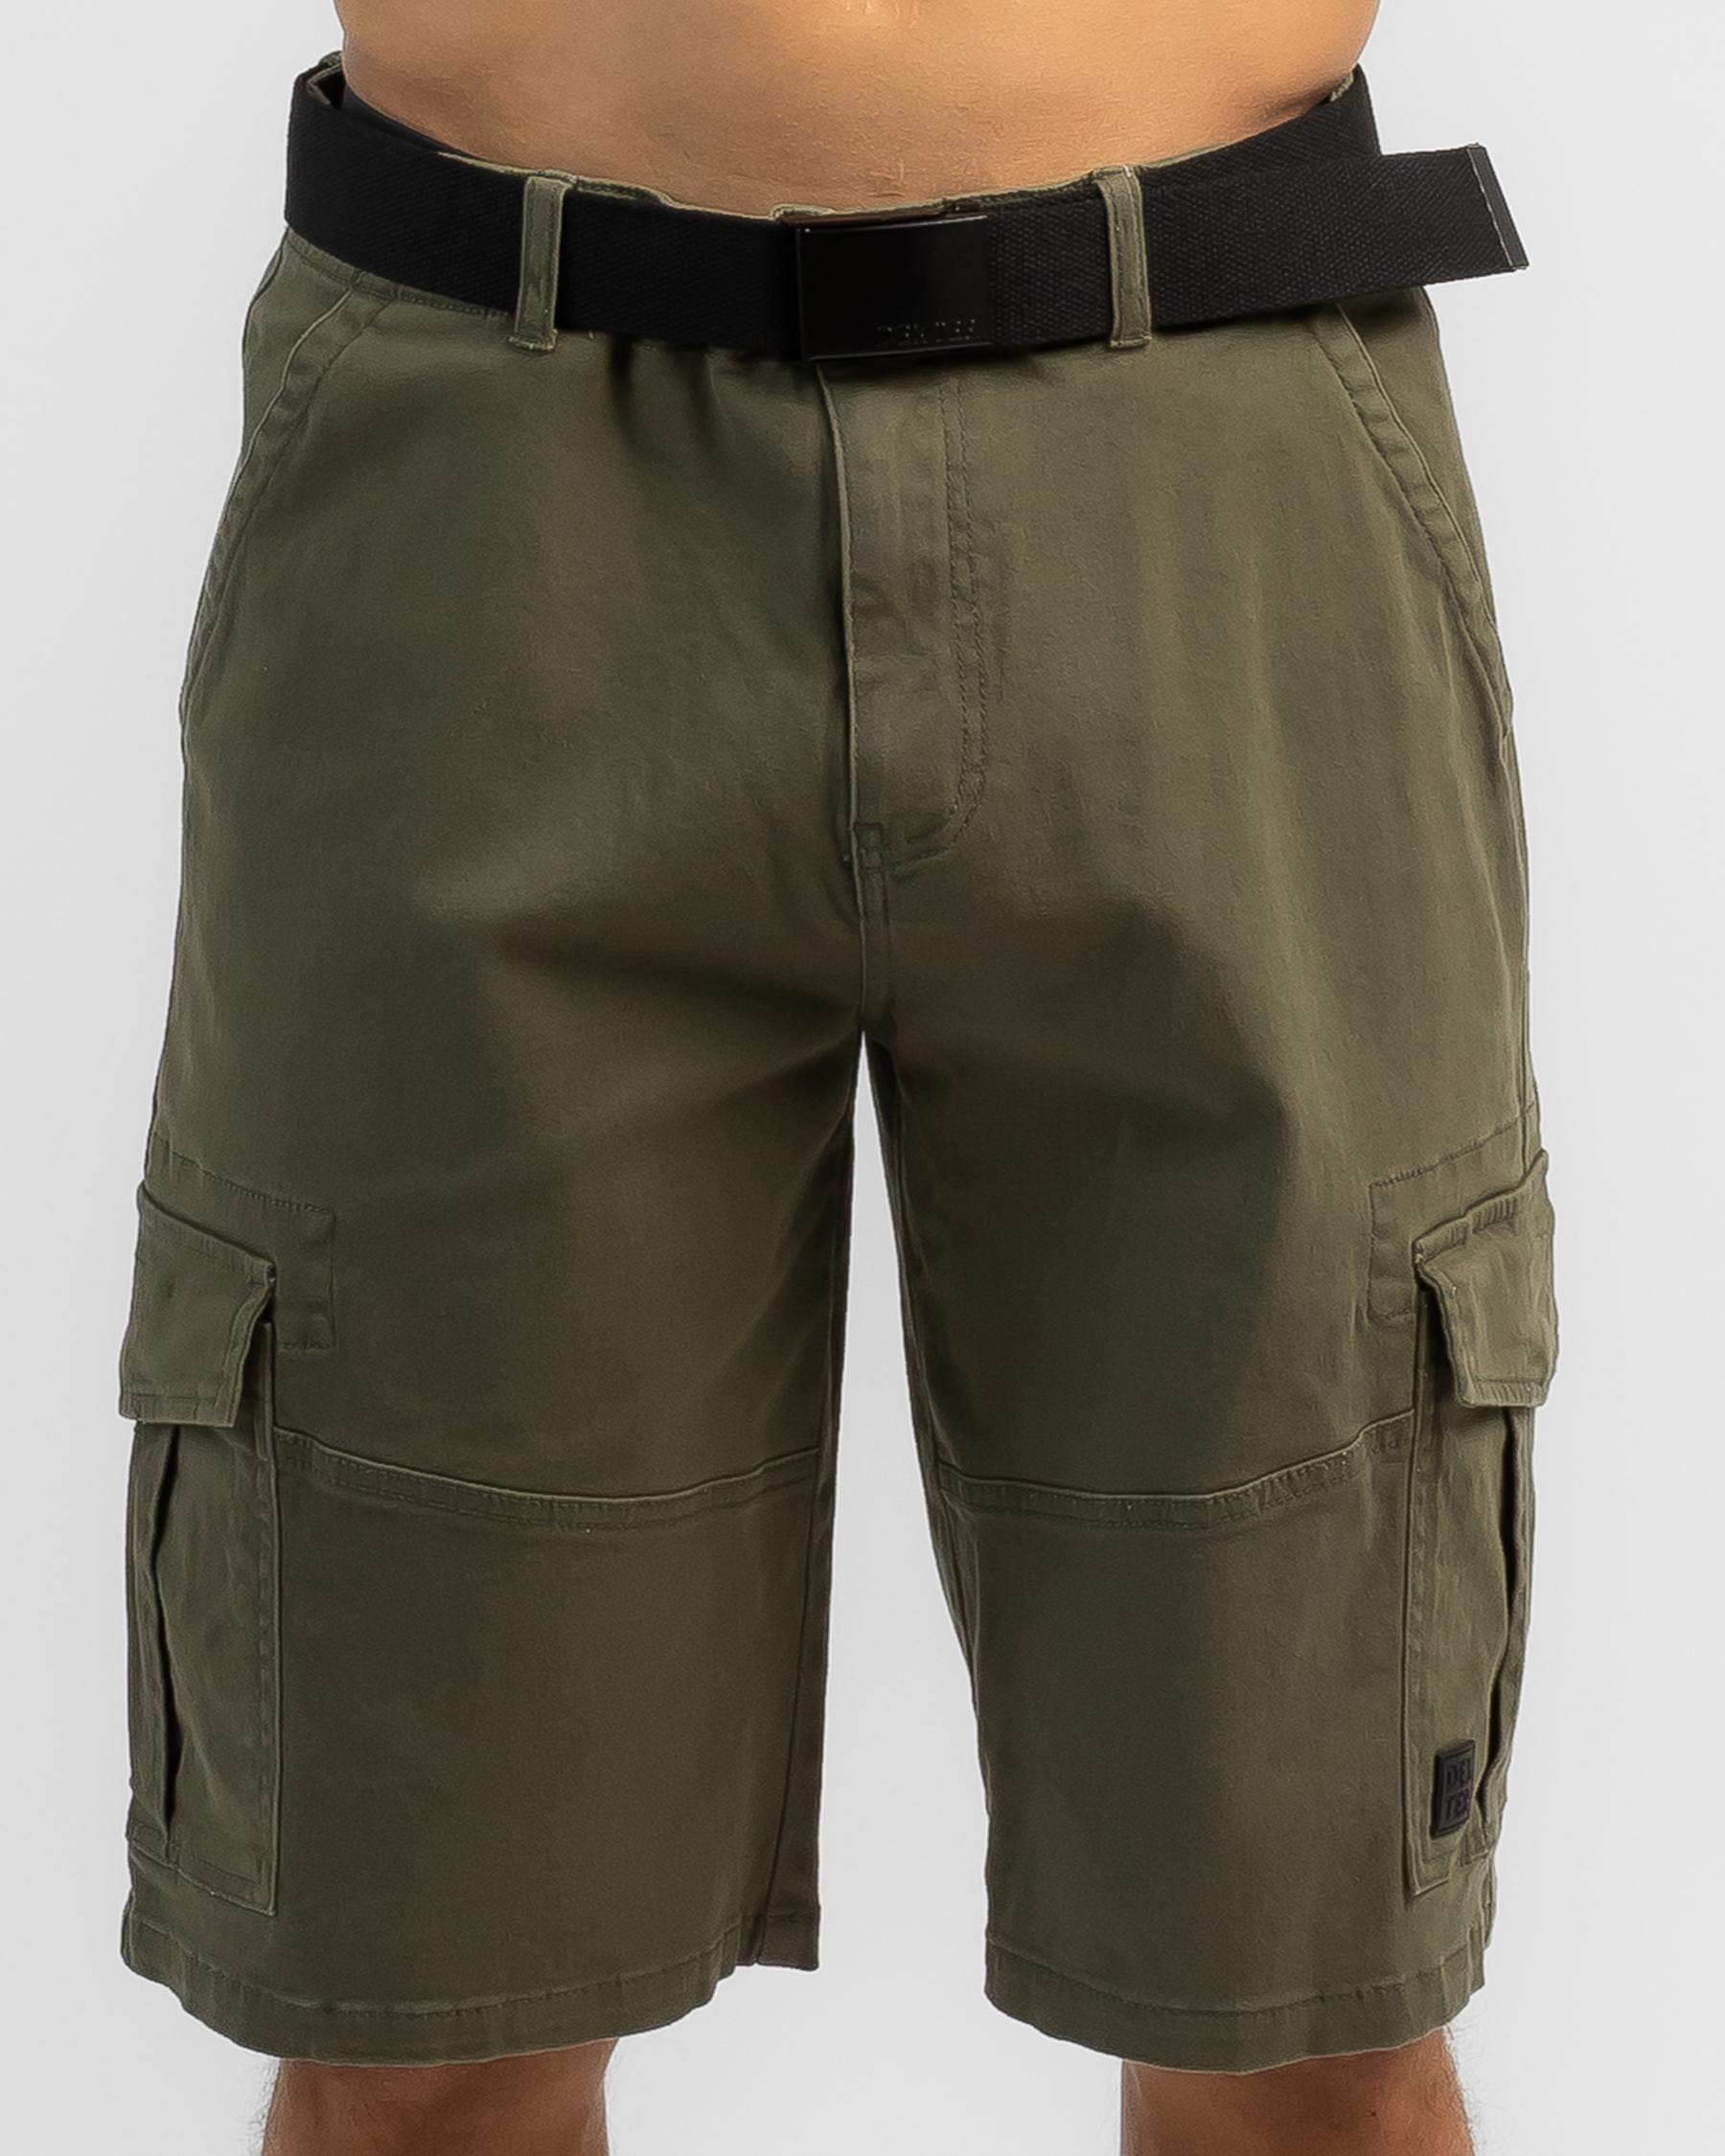 Dexter Guardian Cargo Shorts In Olive - Fast Shipping & Easy Returns ...